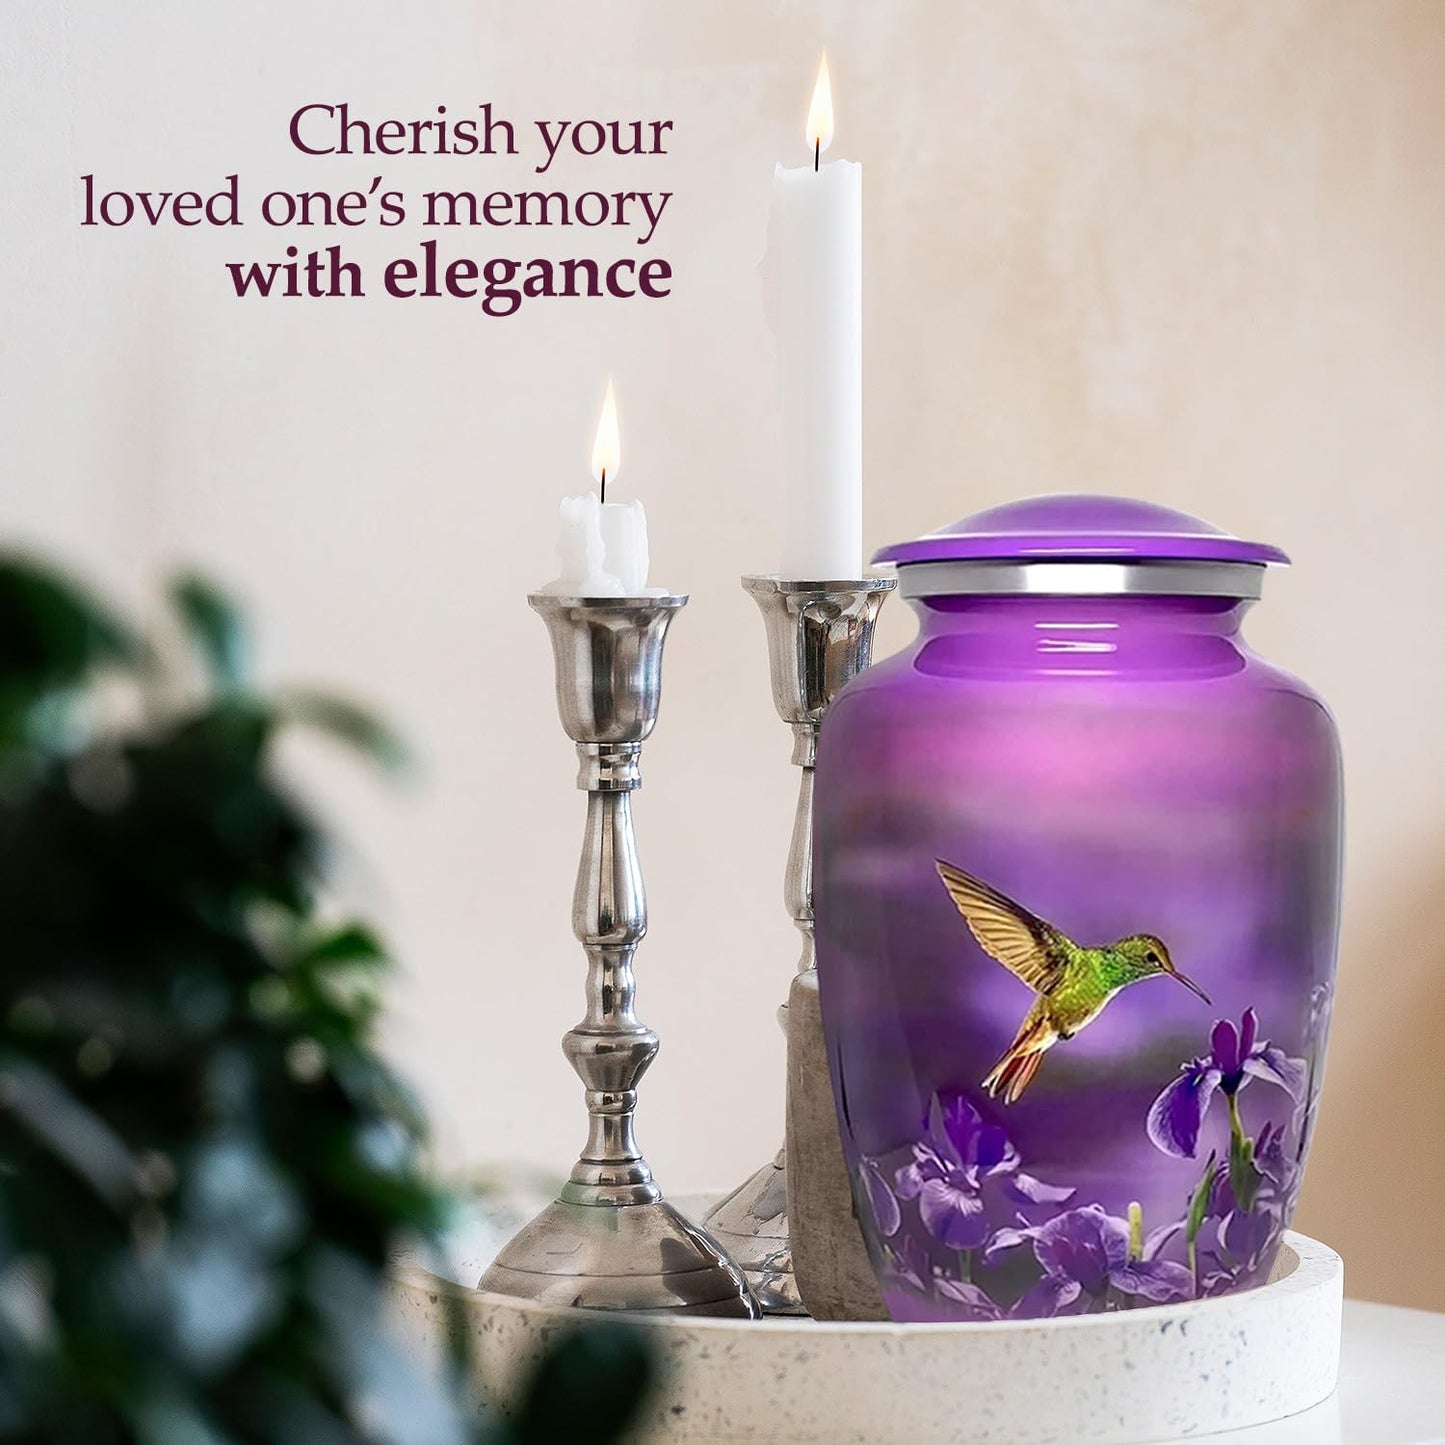 Trupoint Memorials - Urns for Human Ashes Adult Female, Burial Urns, Decorative Urns, Funeral Urns, Cremation Urns for Women and Men - Purple, Hummingbird, Large